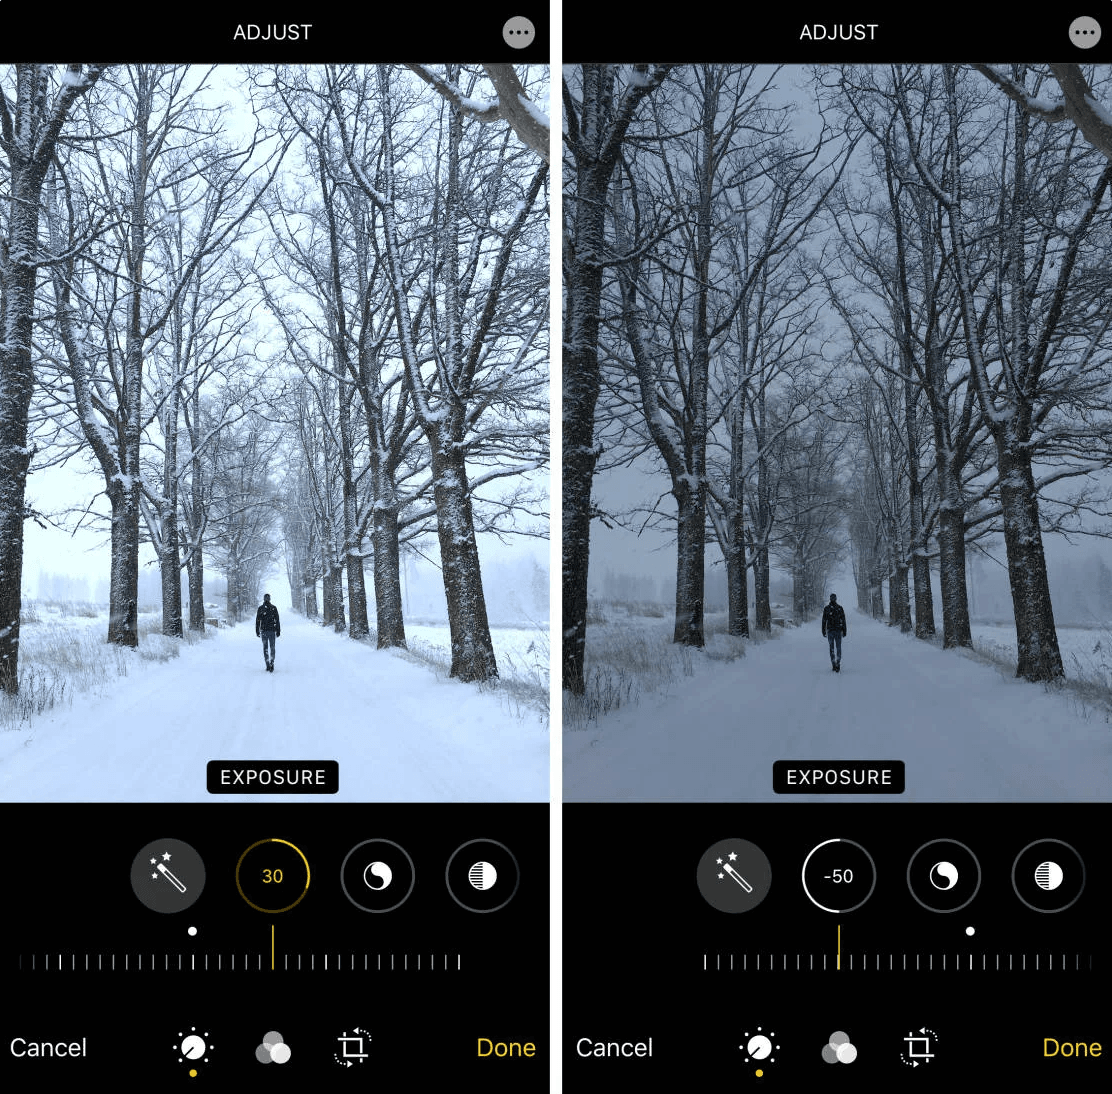 Select the meter-shaped icon at the bottom to Adjust the light and color of your photo